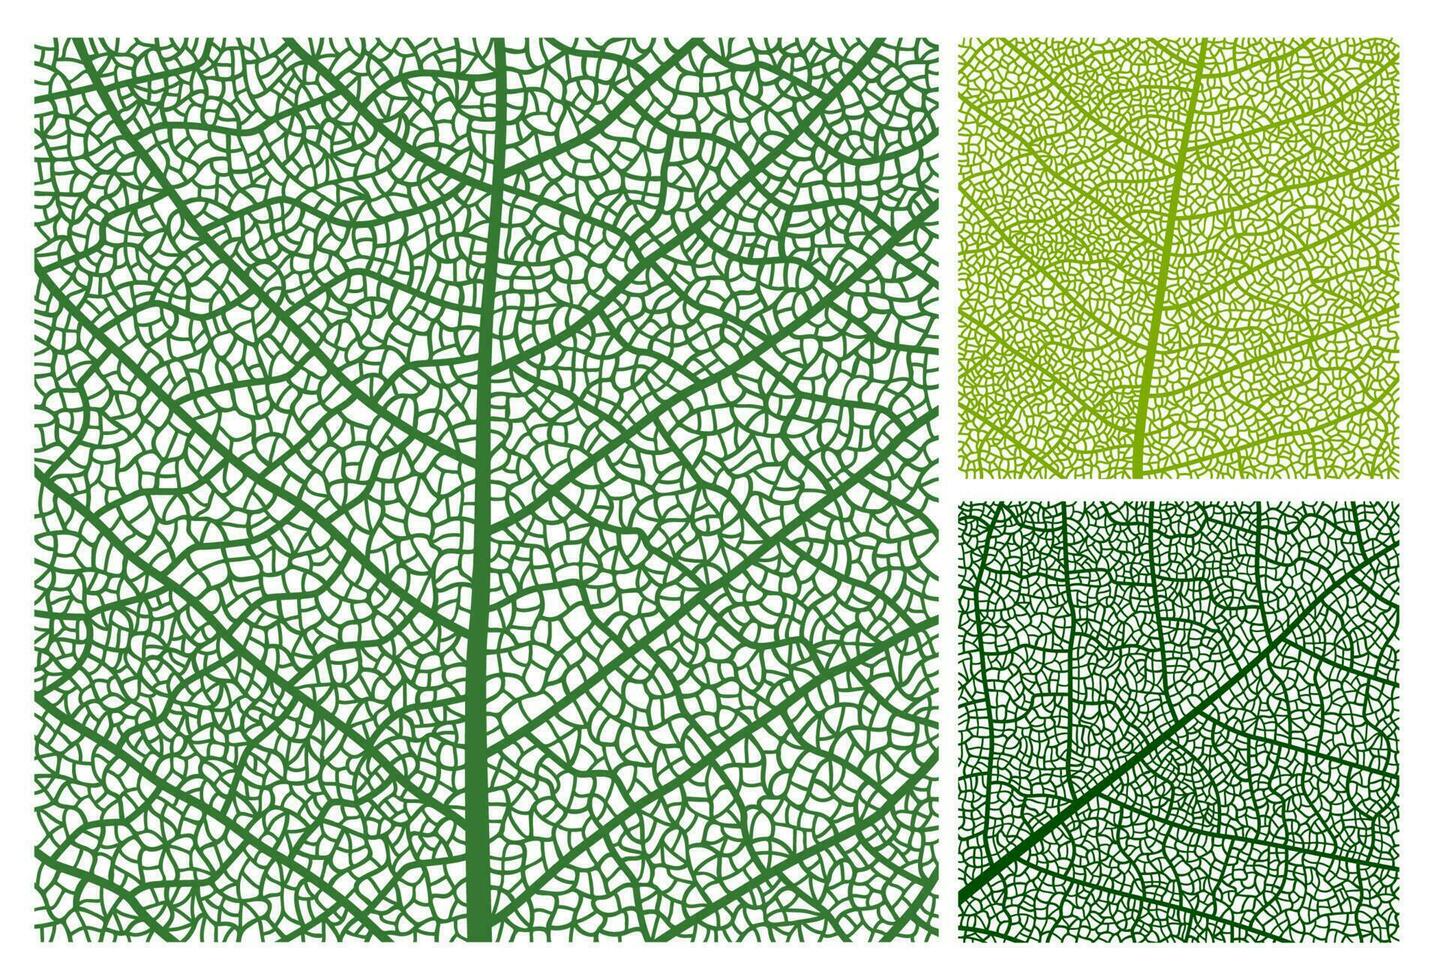 Leaf texture pattern background, veins and cells vector